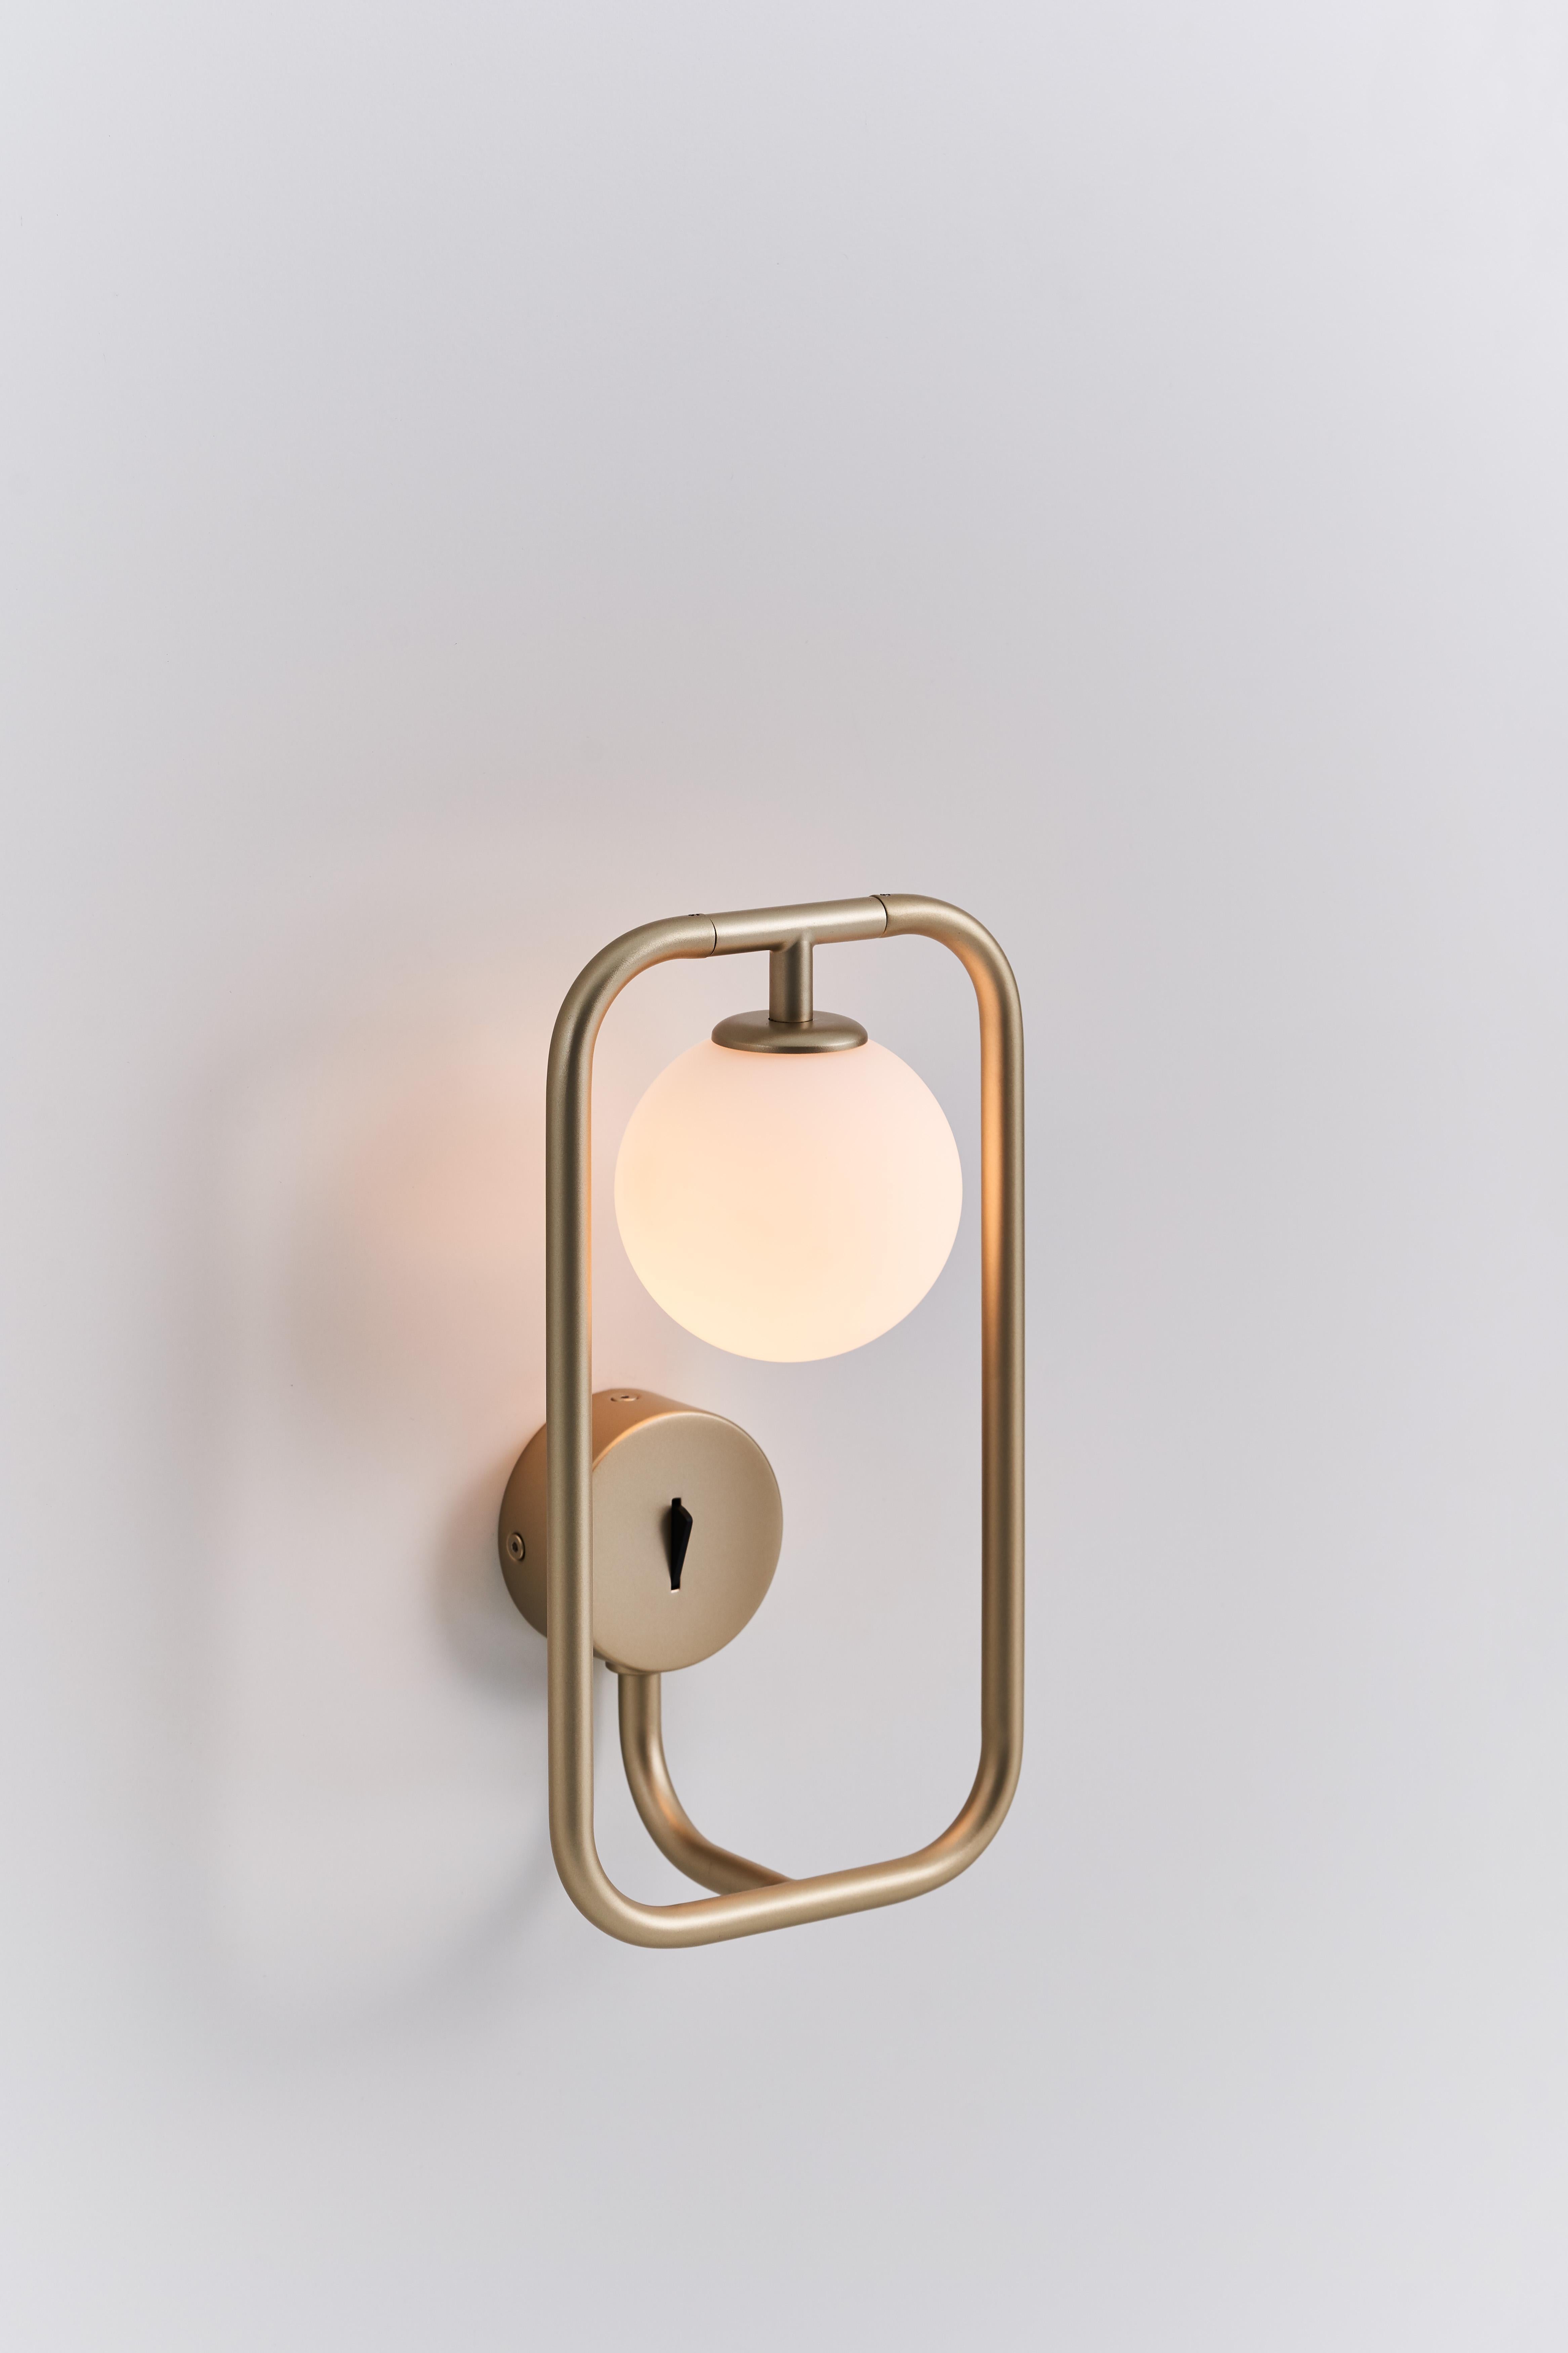 SIRCLE wall sconce, a symbolization merged Square and Circle, inspired by the East aesthetic philosophy, the circular light ball just like a soft tender mind leans on the rigid prudent frame, chemically shaped a harmonious feature with its flexible